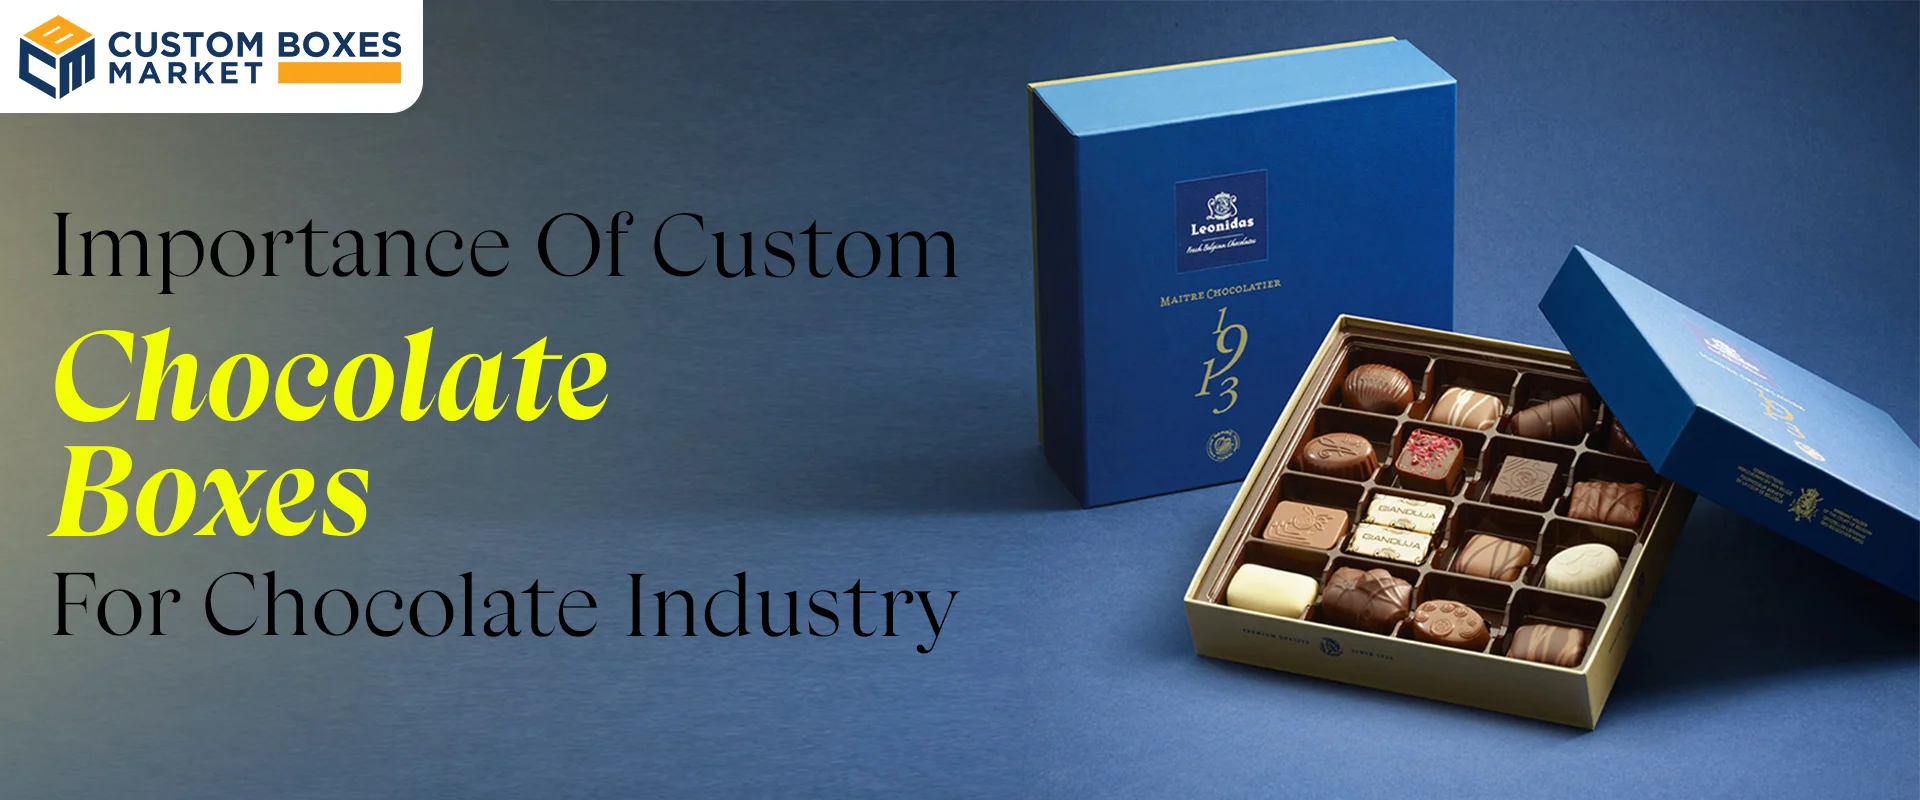 Importance Of Custom Chocolate Boxes For Chocolate Industry